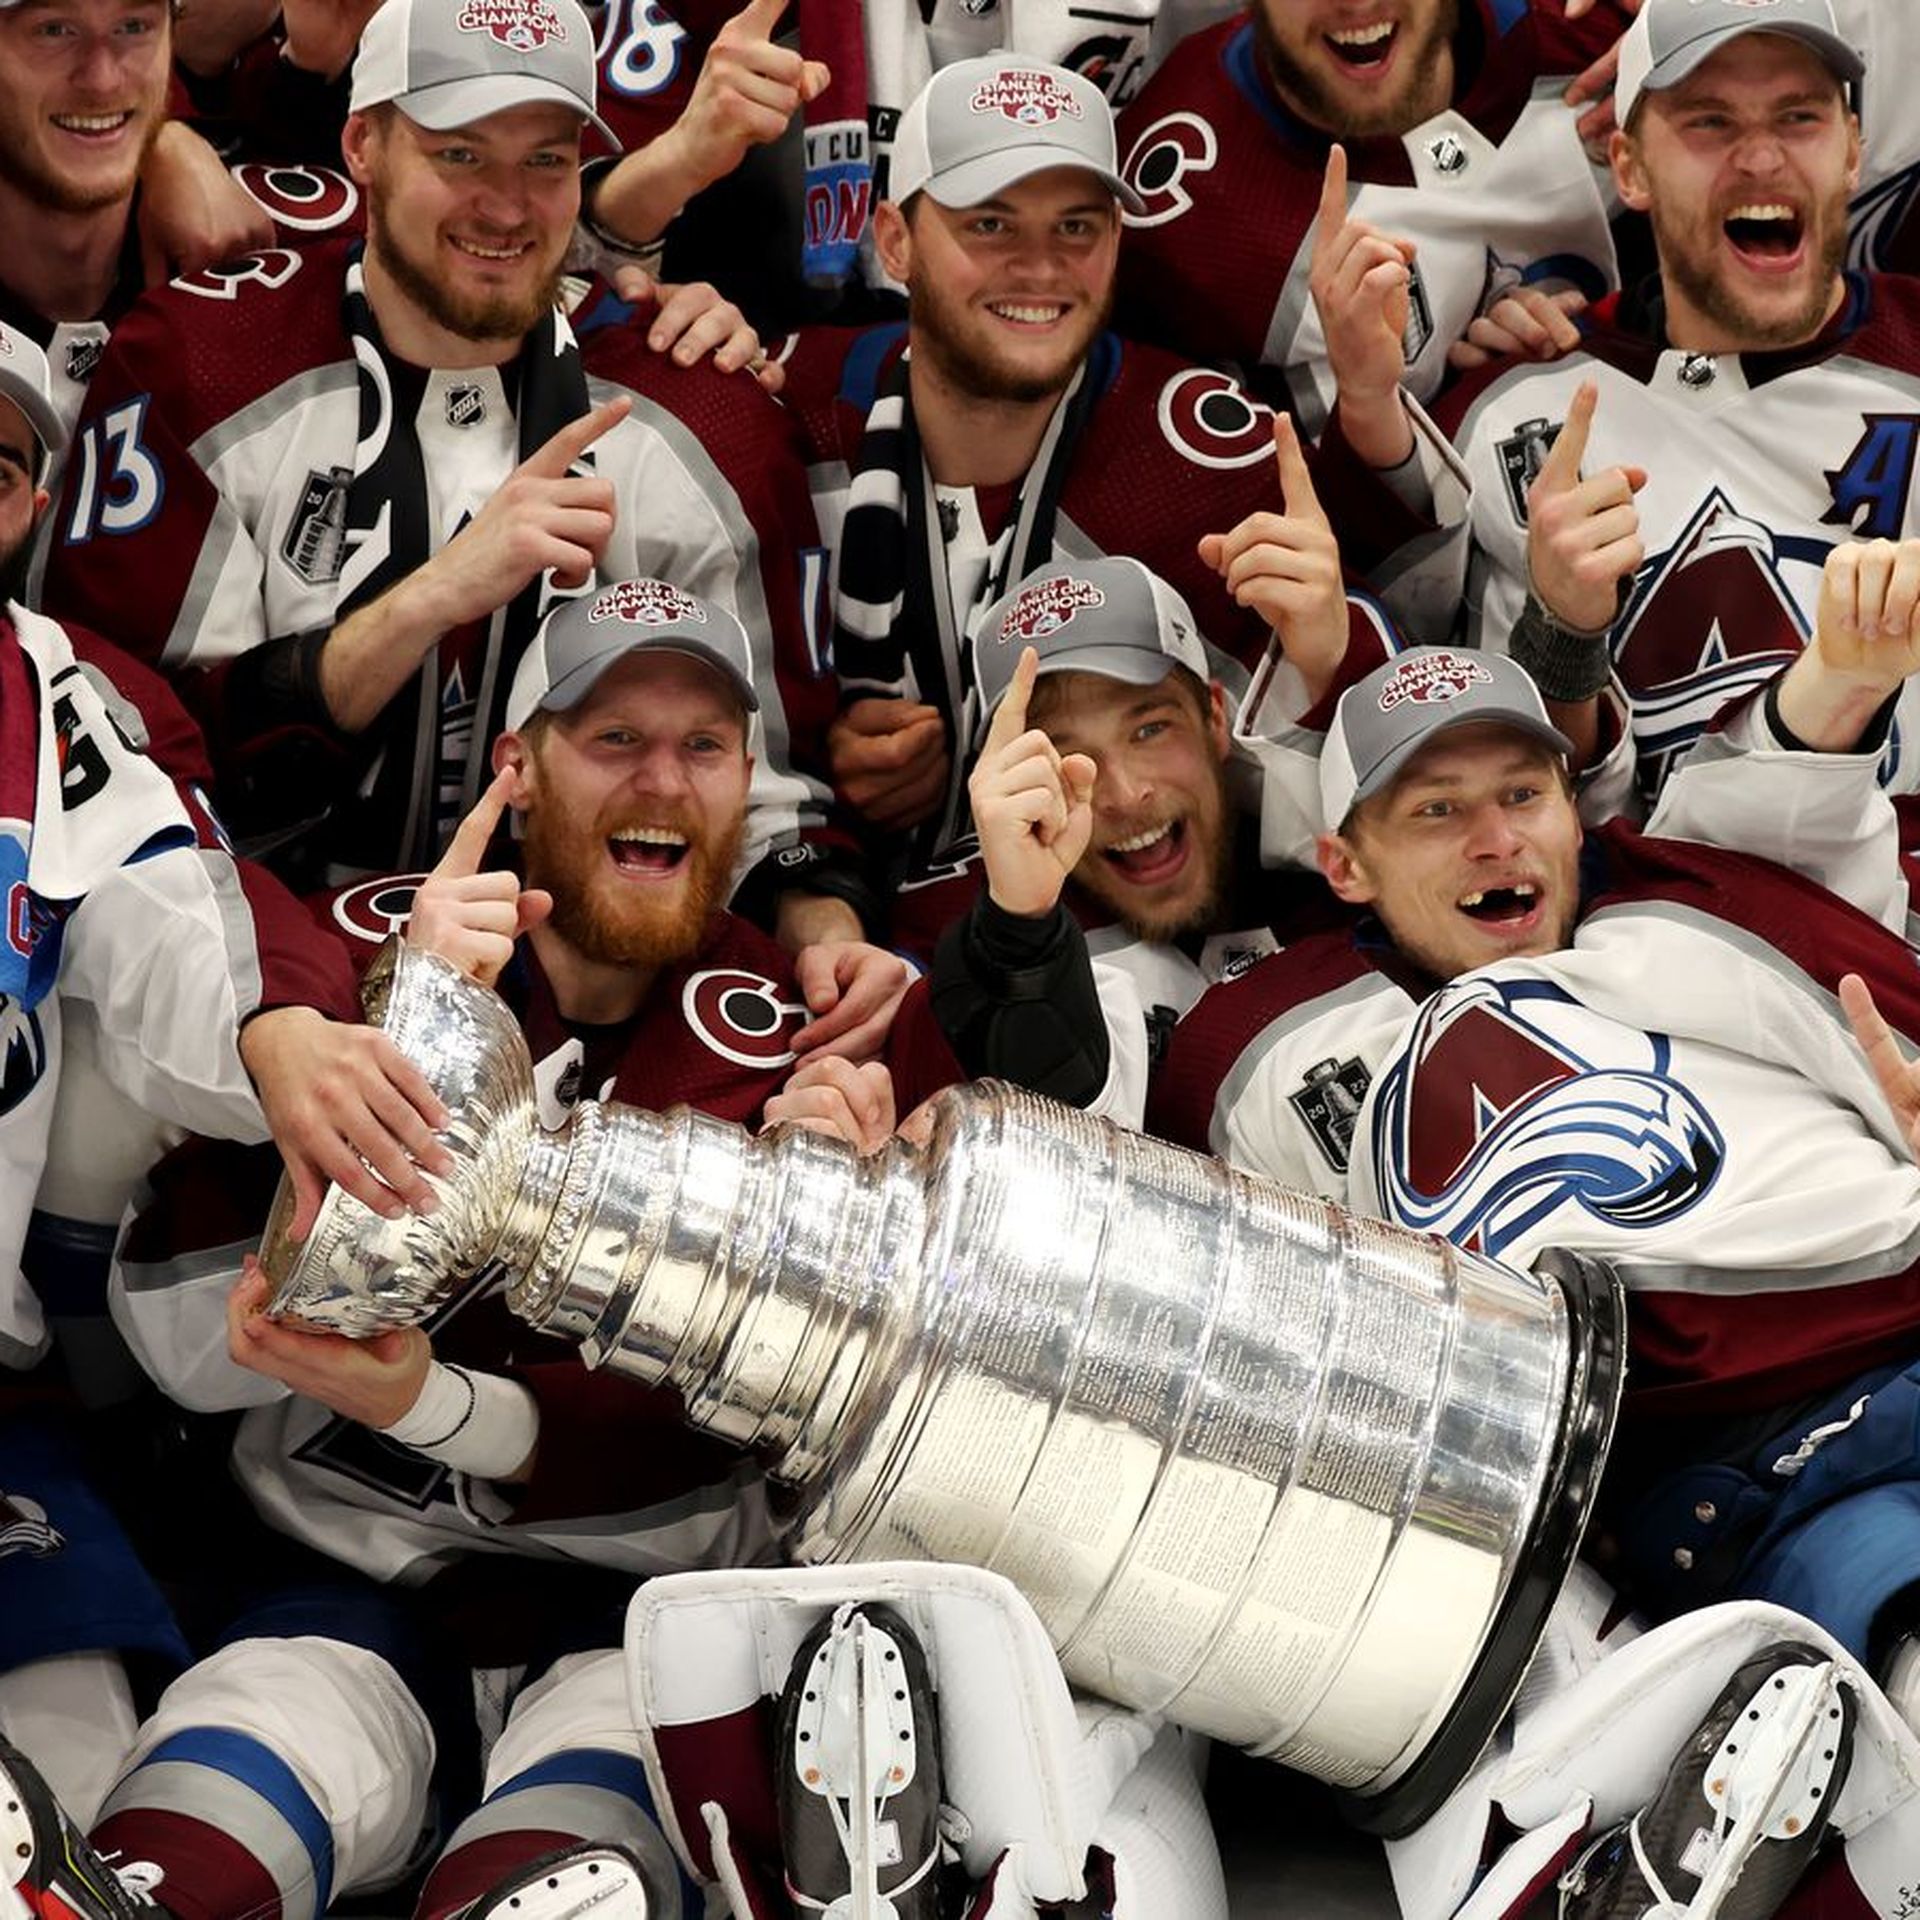 Colorado Avalanche Jerseys Throughout Franchise History